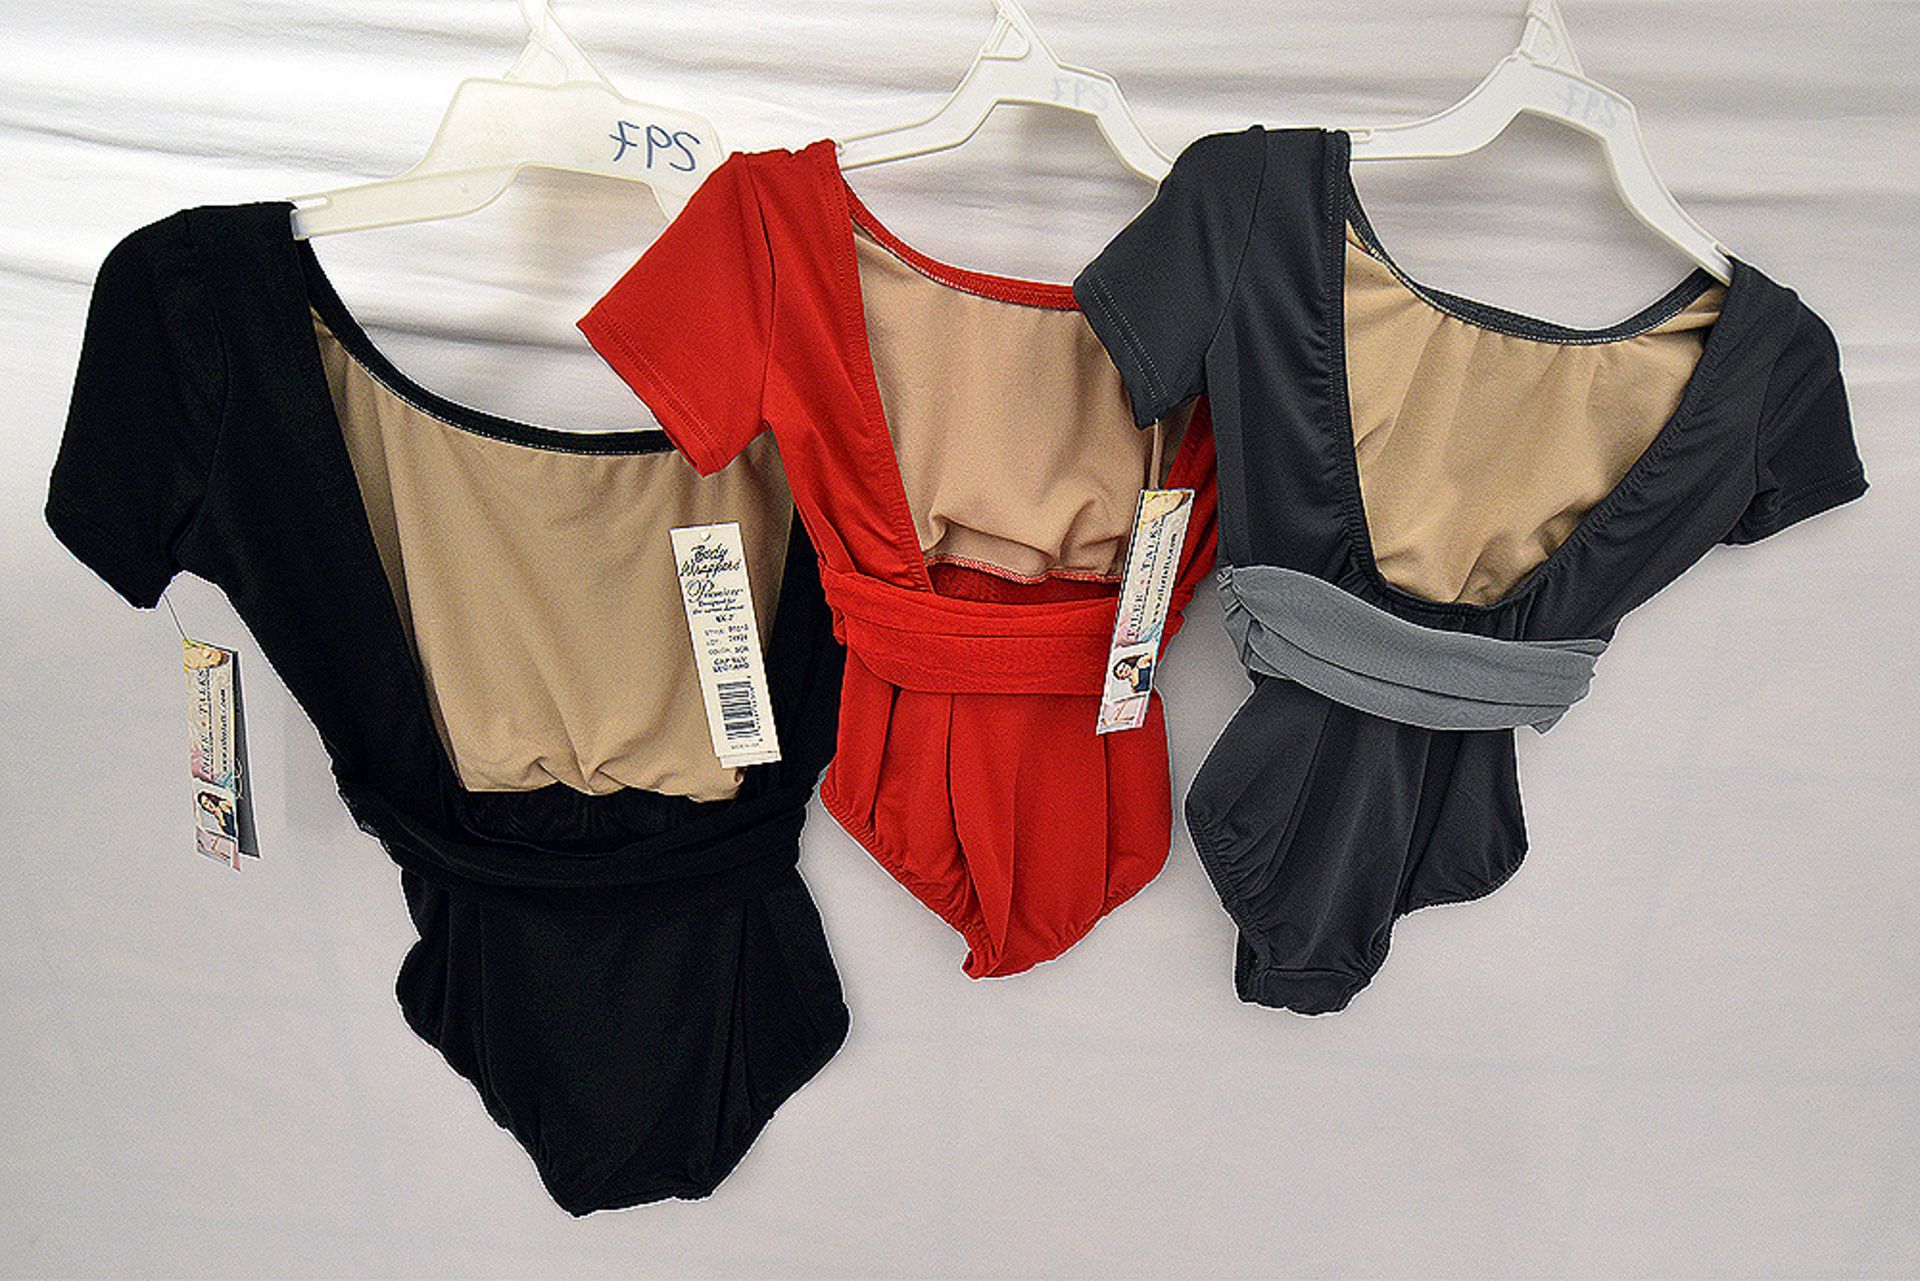 Ass't Size Leotards (MSRP $30) - Image 2 of 5